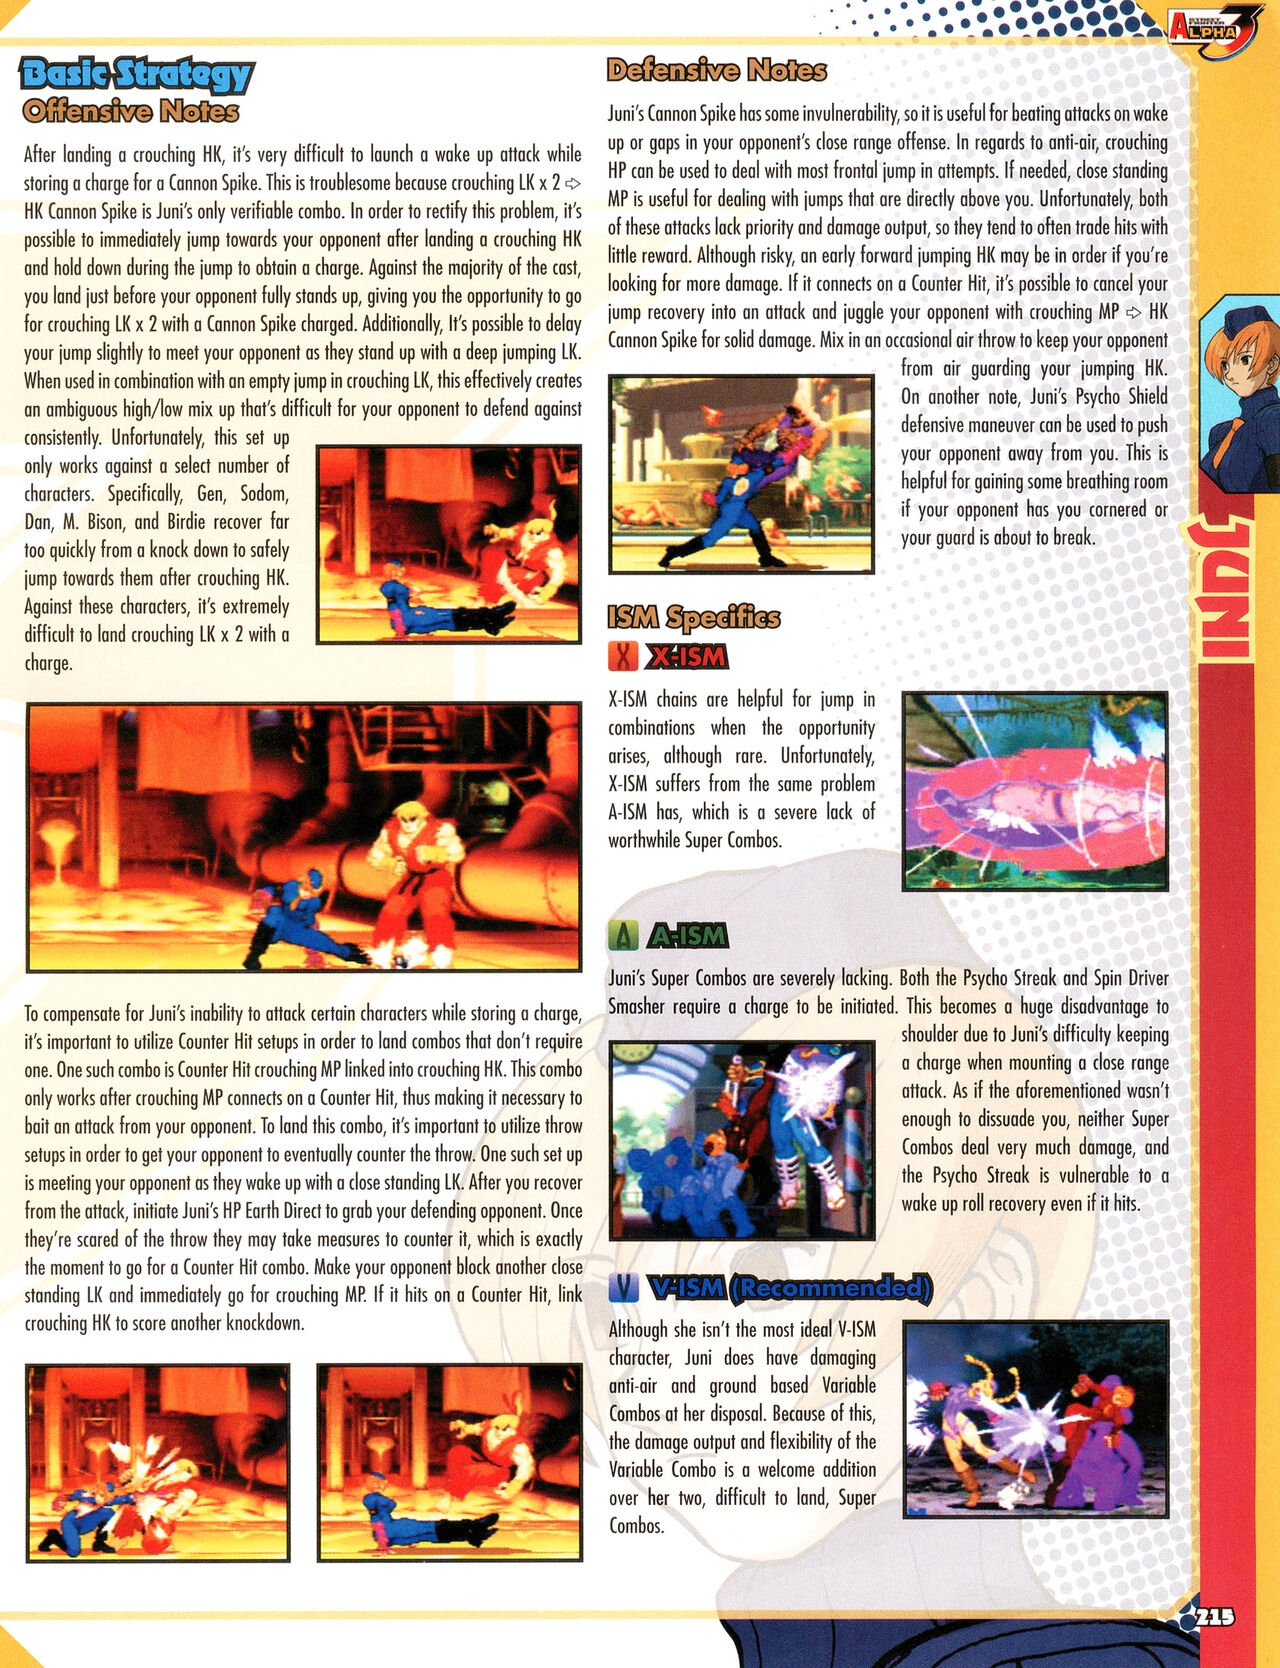 Street Fighter Alpha Anthology Strategy Guide 216